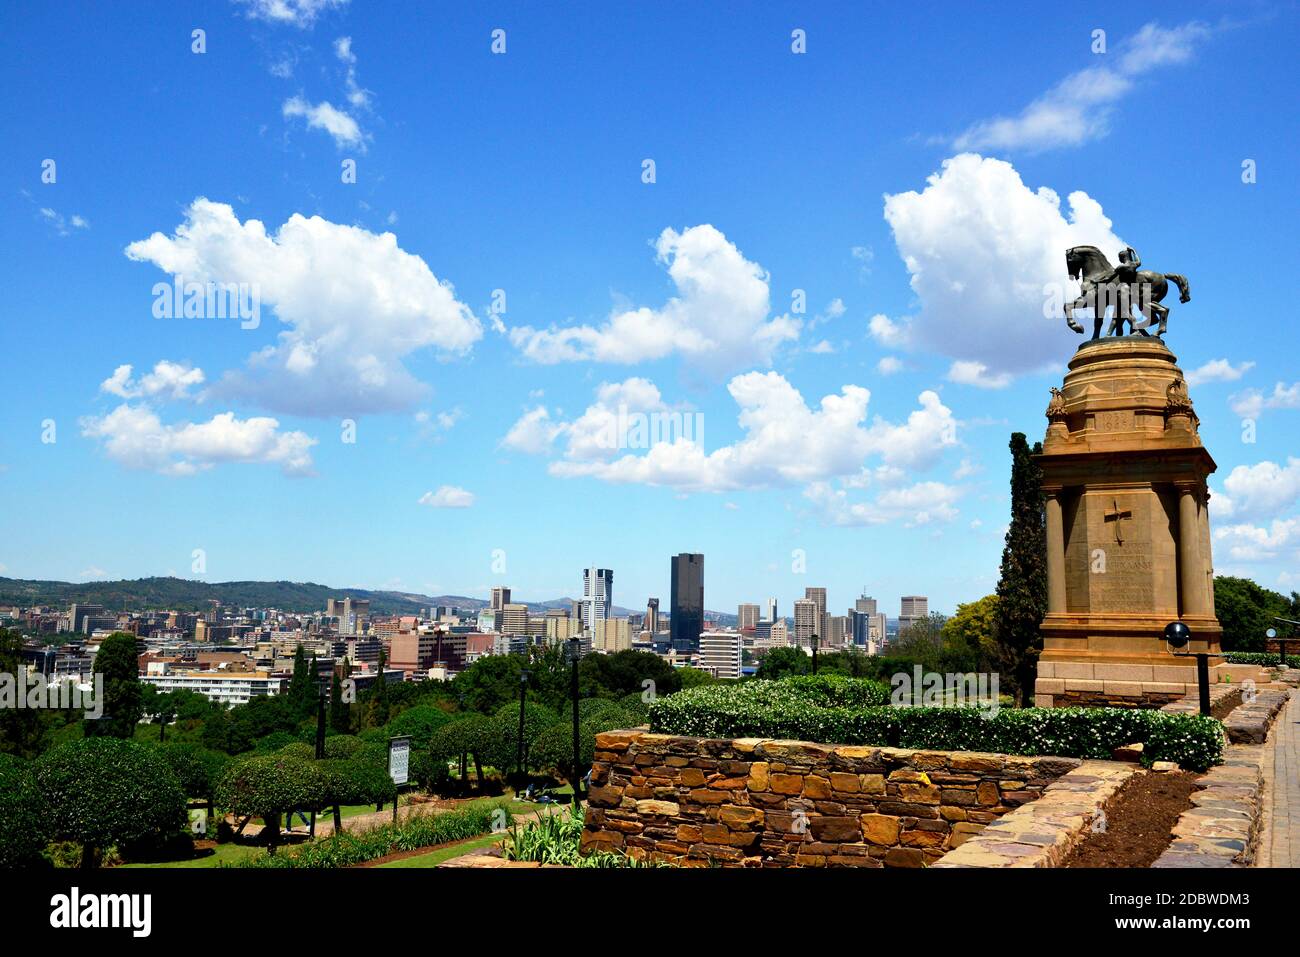 View of Pretoria with the Delville Wood War Memorial, South Africa. The Delville Wood War Memorial memorial commemorating the South African soldiers who died in World War I and the Korean War. Stock Photo